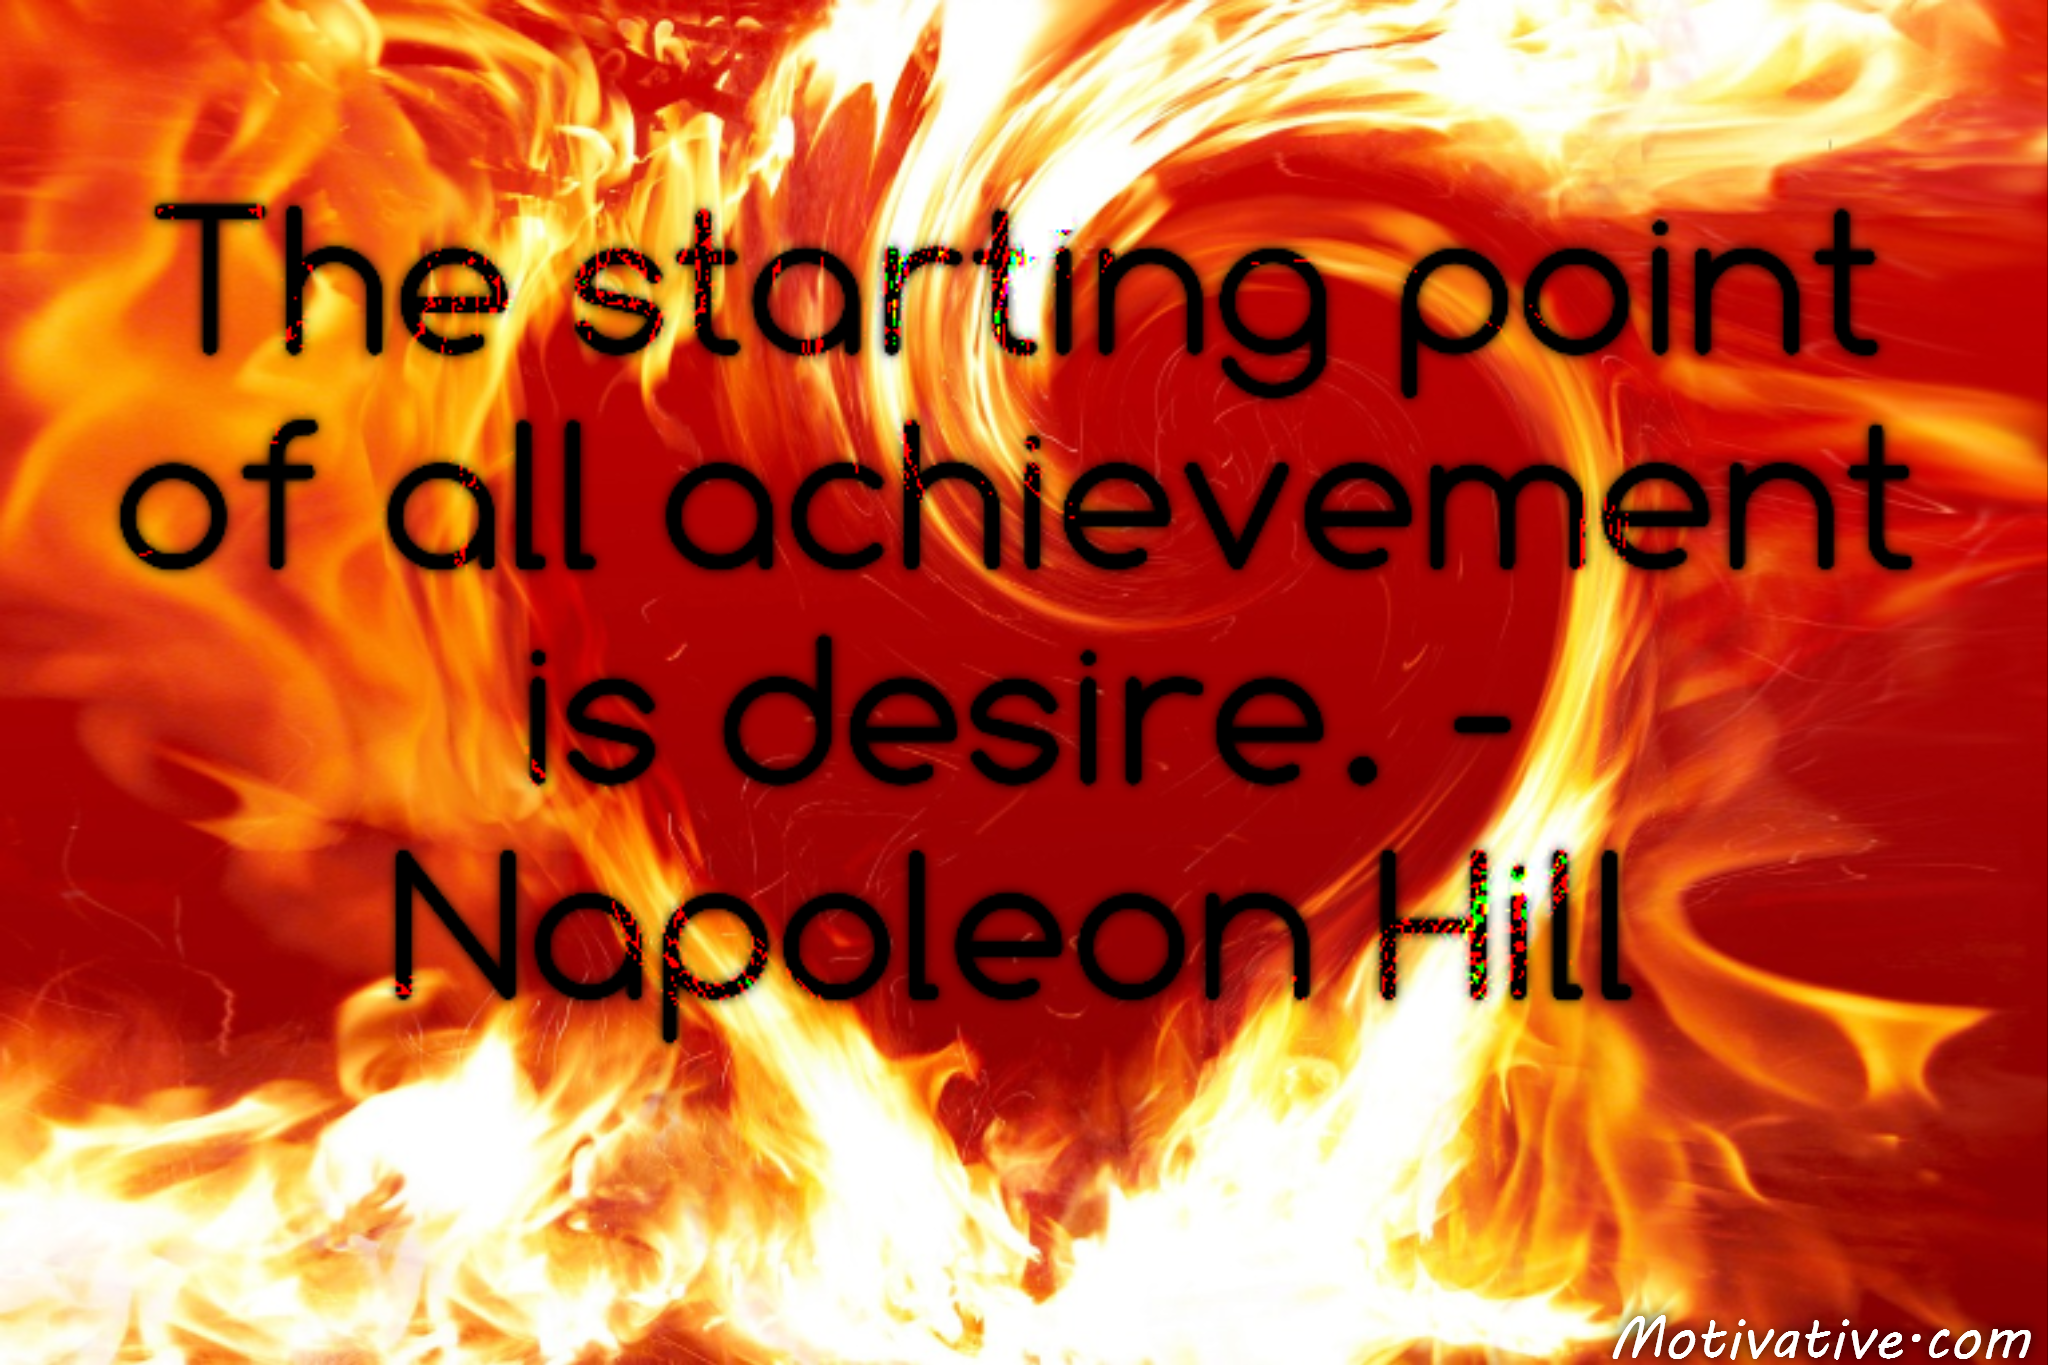 The starting point of all achievement is desire. – Napoleon Hill